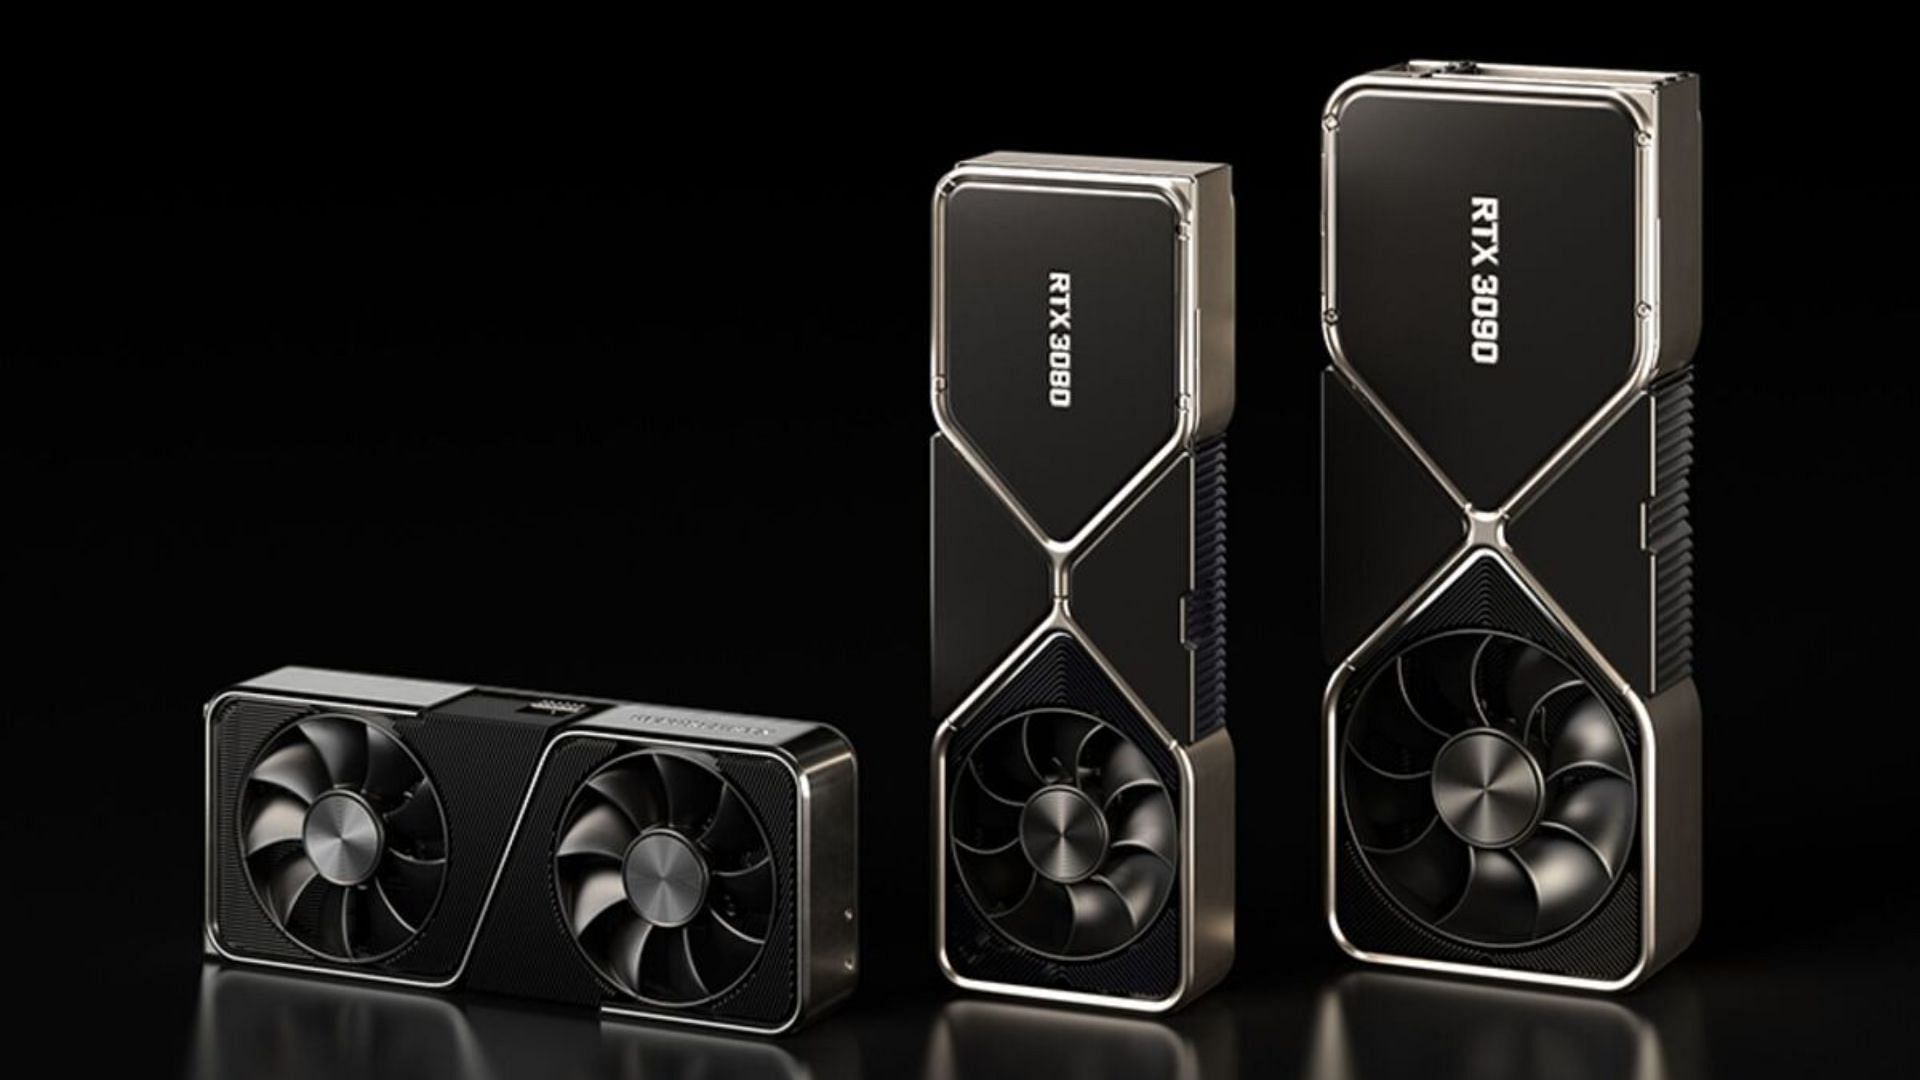 The RTX 3080 Founders